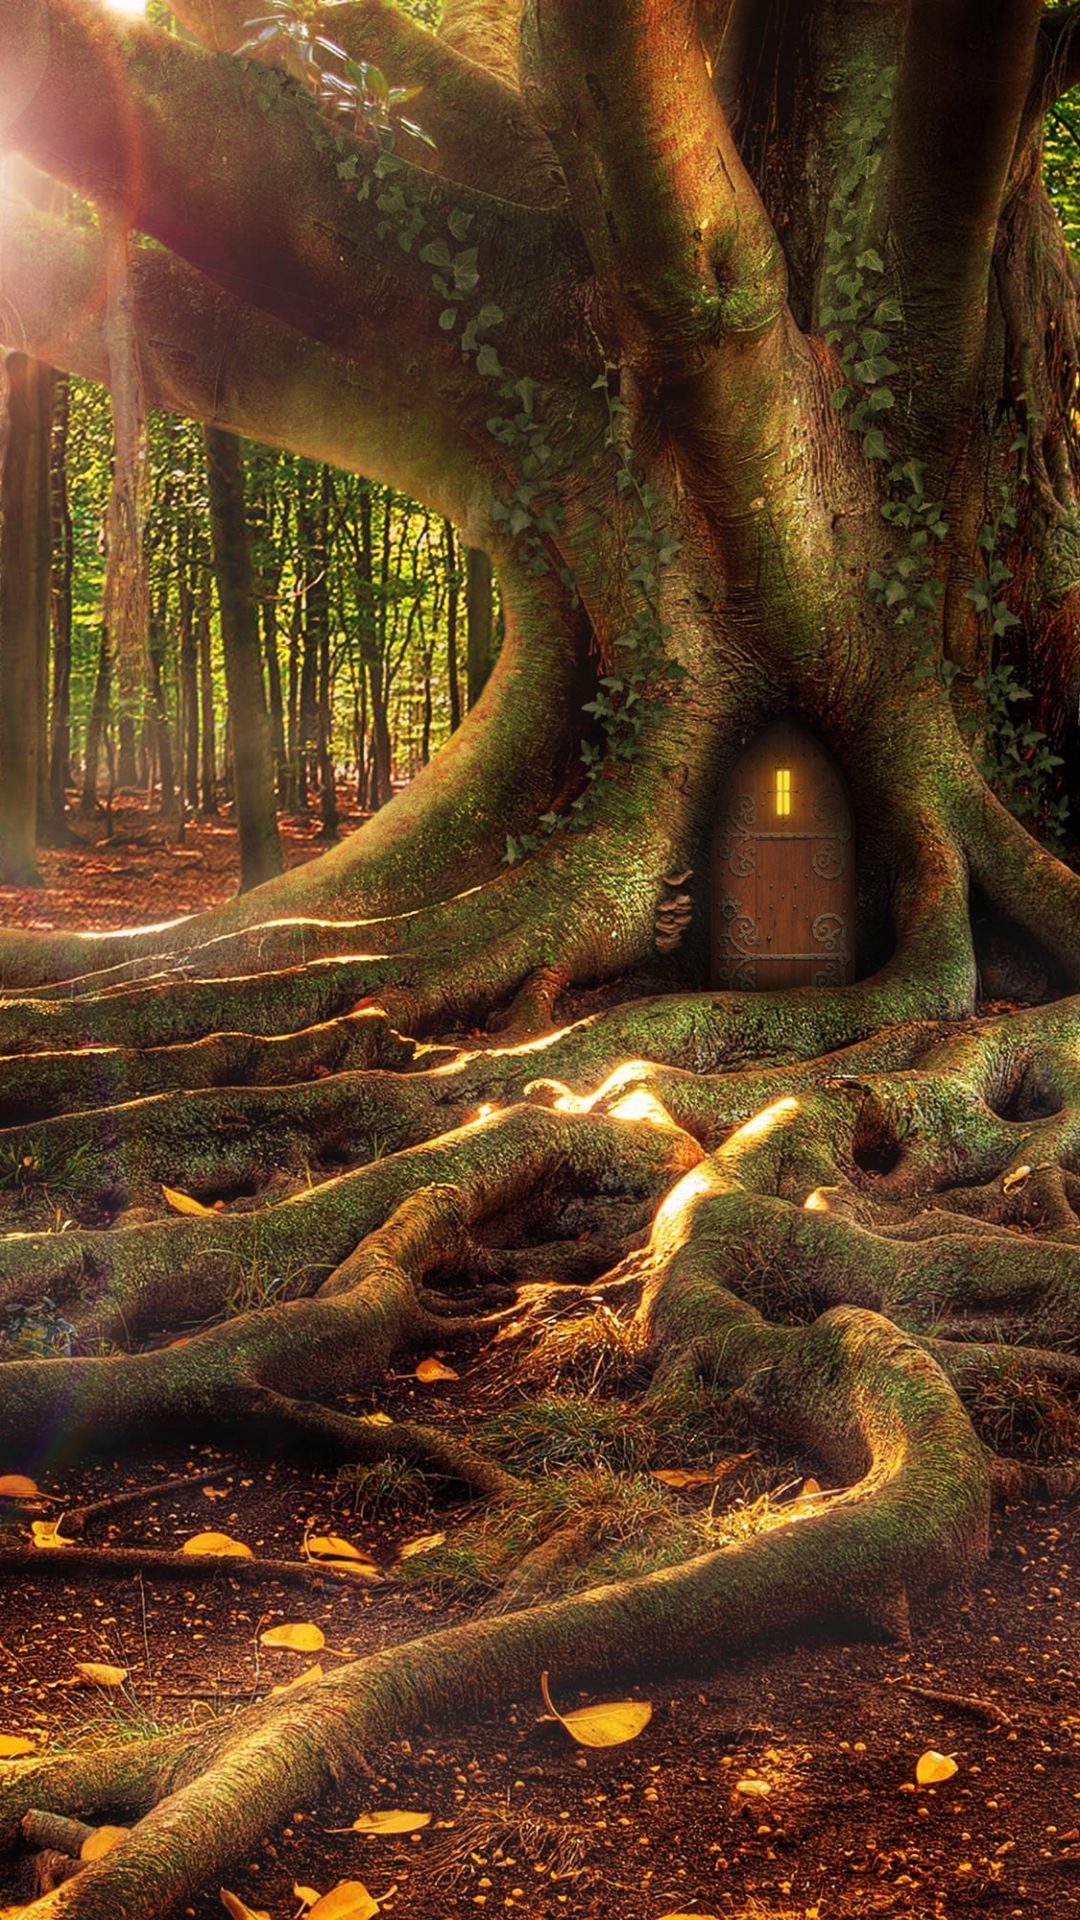 Treehouse in a Fantasy forest HD Wallpaper